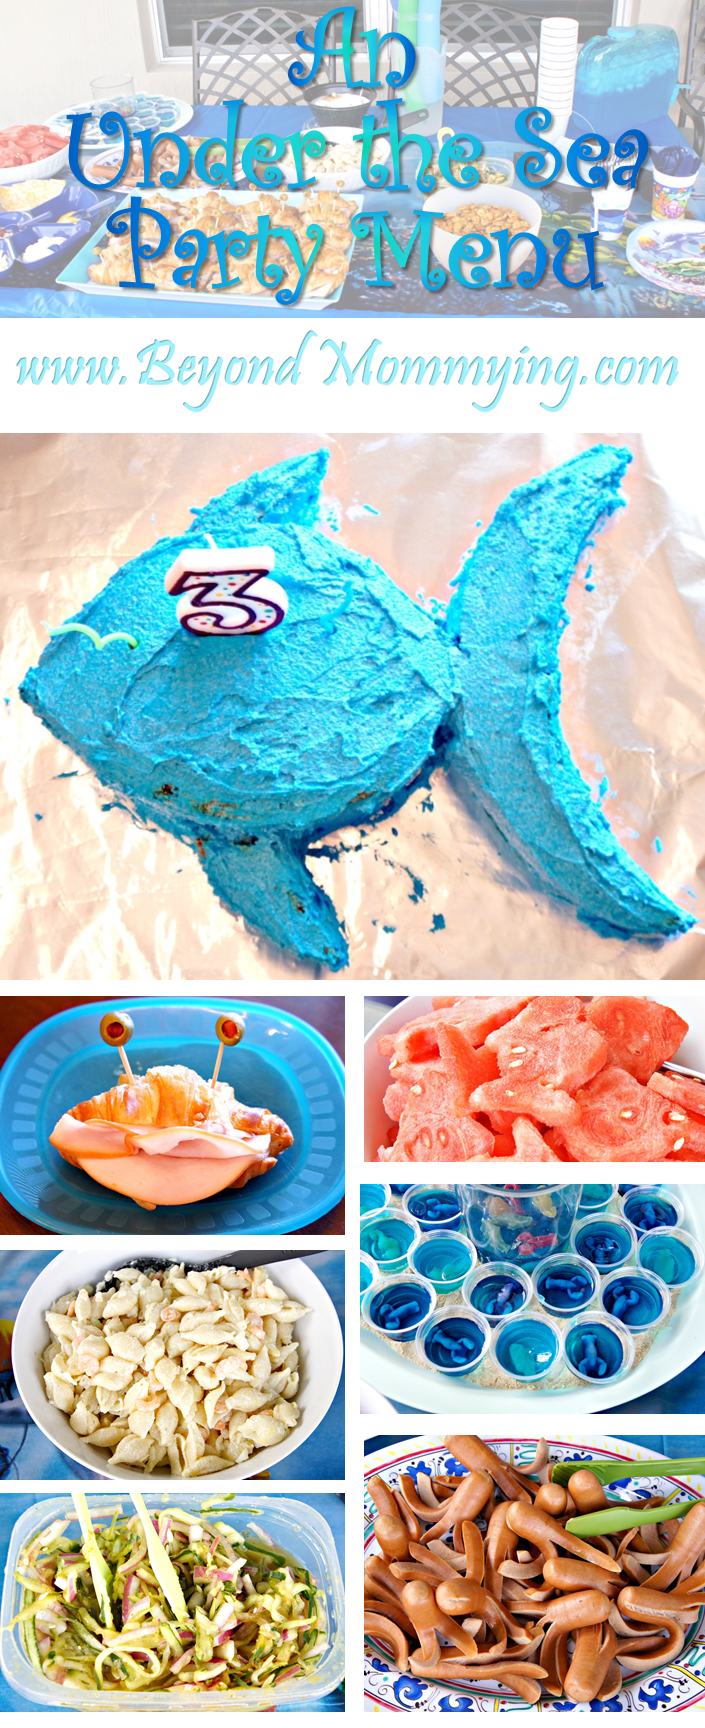 An Under the Sea Party menu